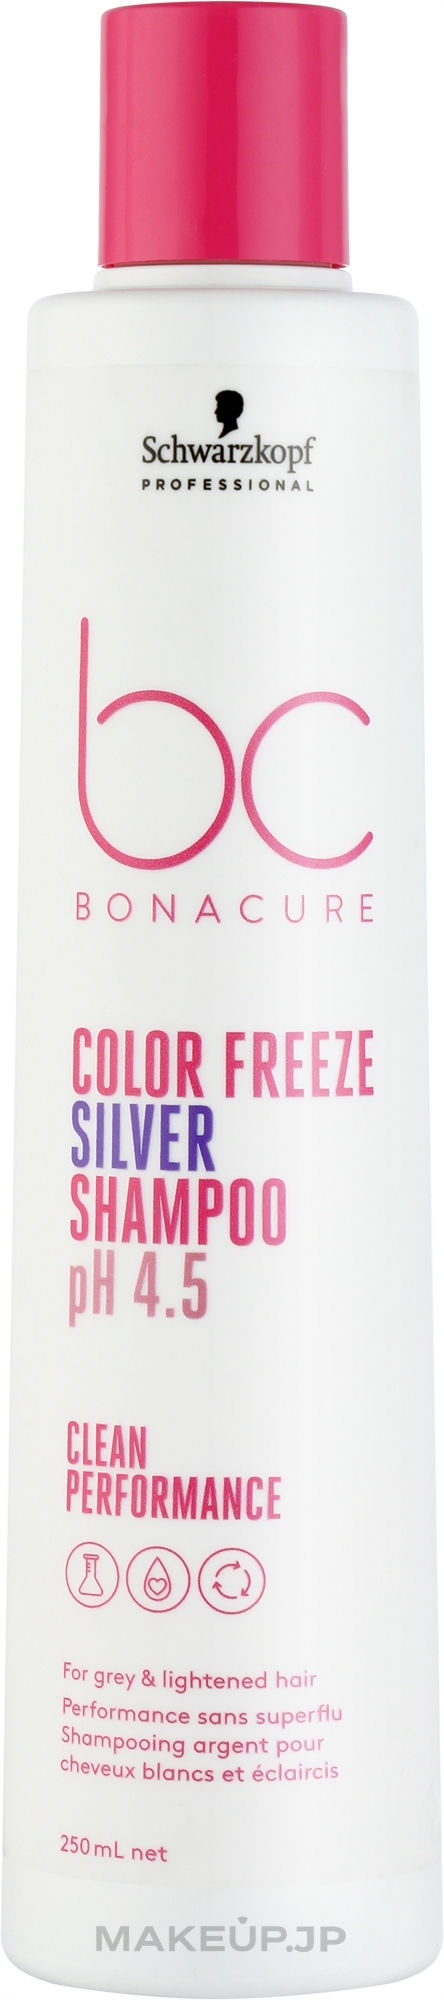 Shampoo for Grey and Lightened Hair - Schwarzkopf Professional Bonacure Color Freeze Silver Shampoo pH 4.5 — photo 250 ml